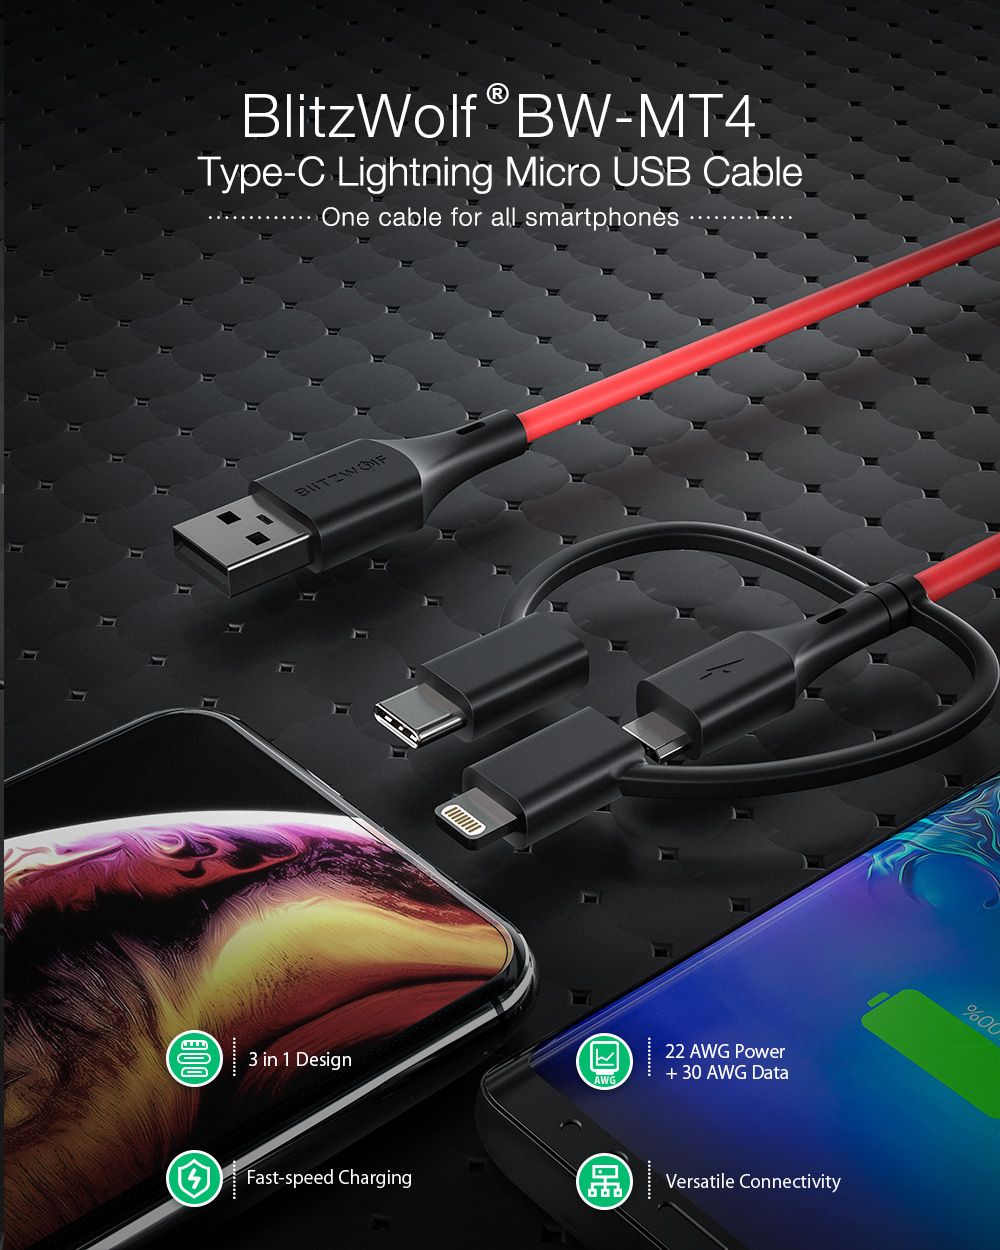 BlitzWolfreg-BW-MT4-3-in-1-Type-C-Lightning-Micro-USB-Data-Cable-With-MFI-Certified-3ft091m-for-Sams-1475579